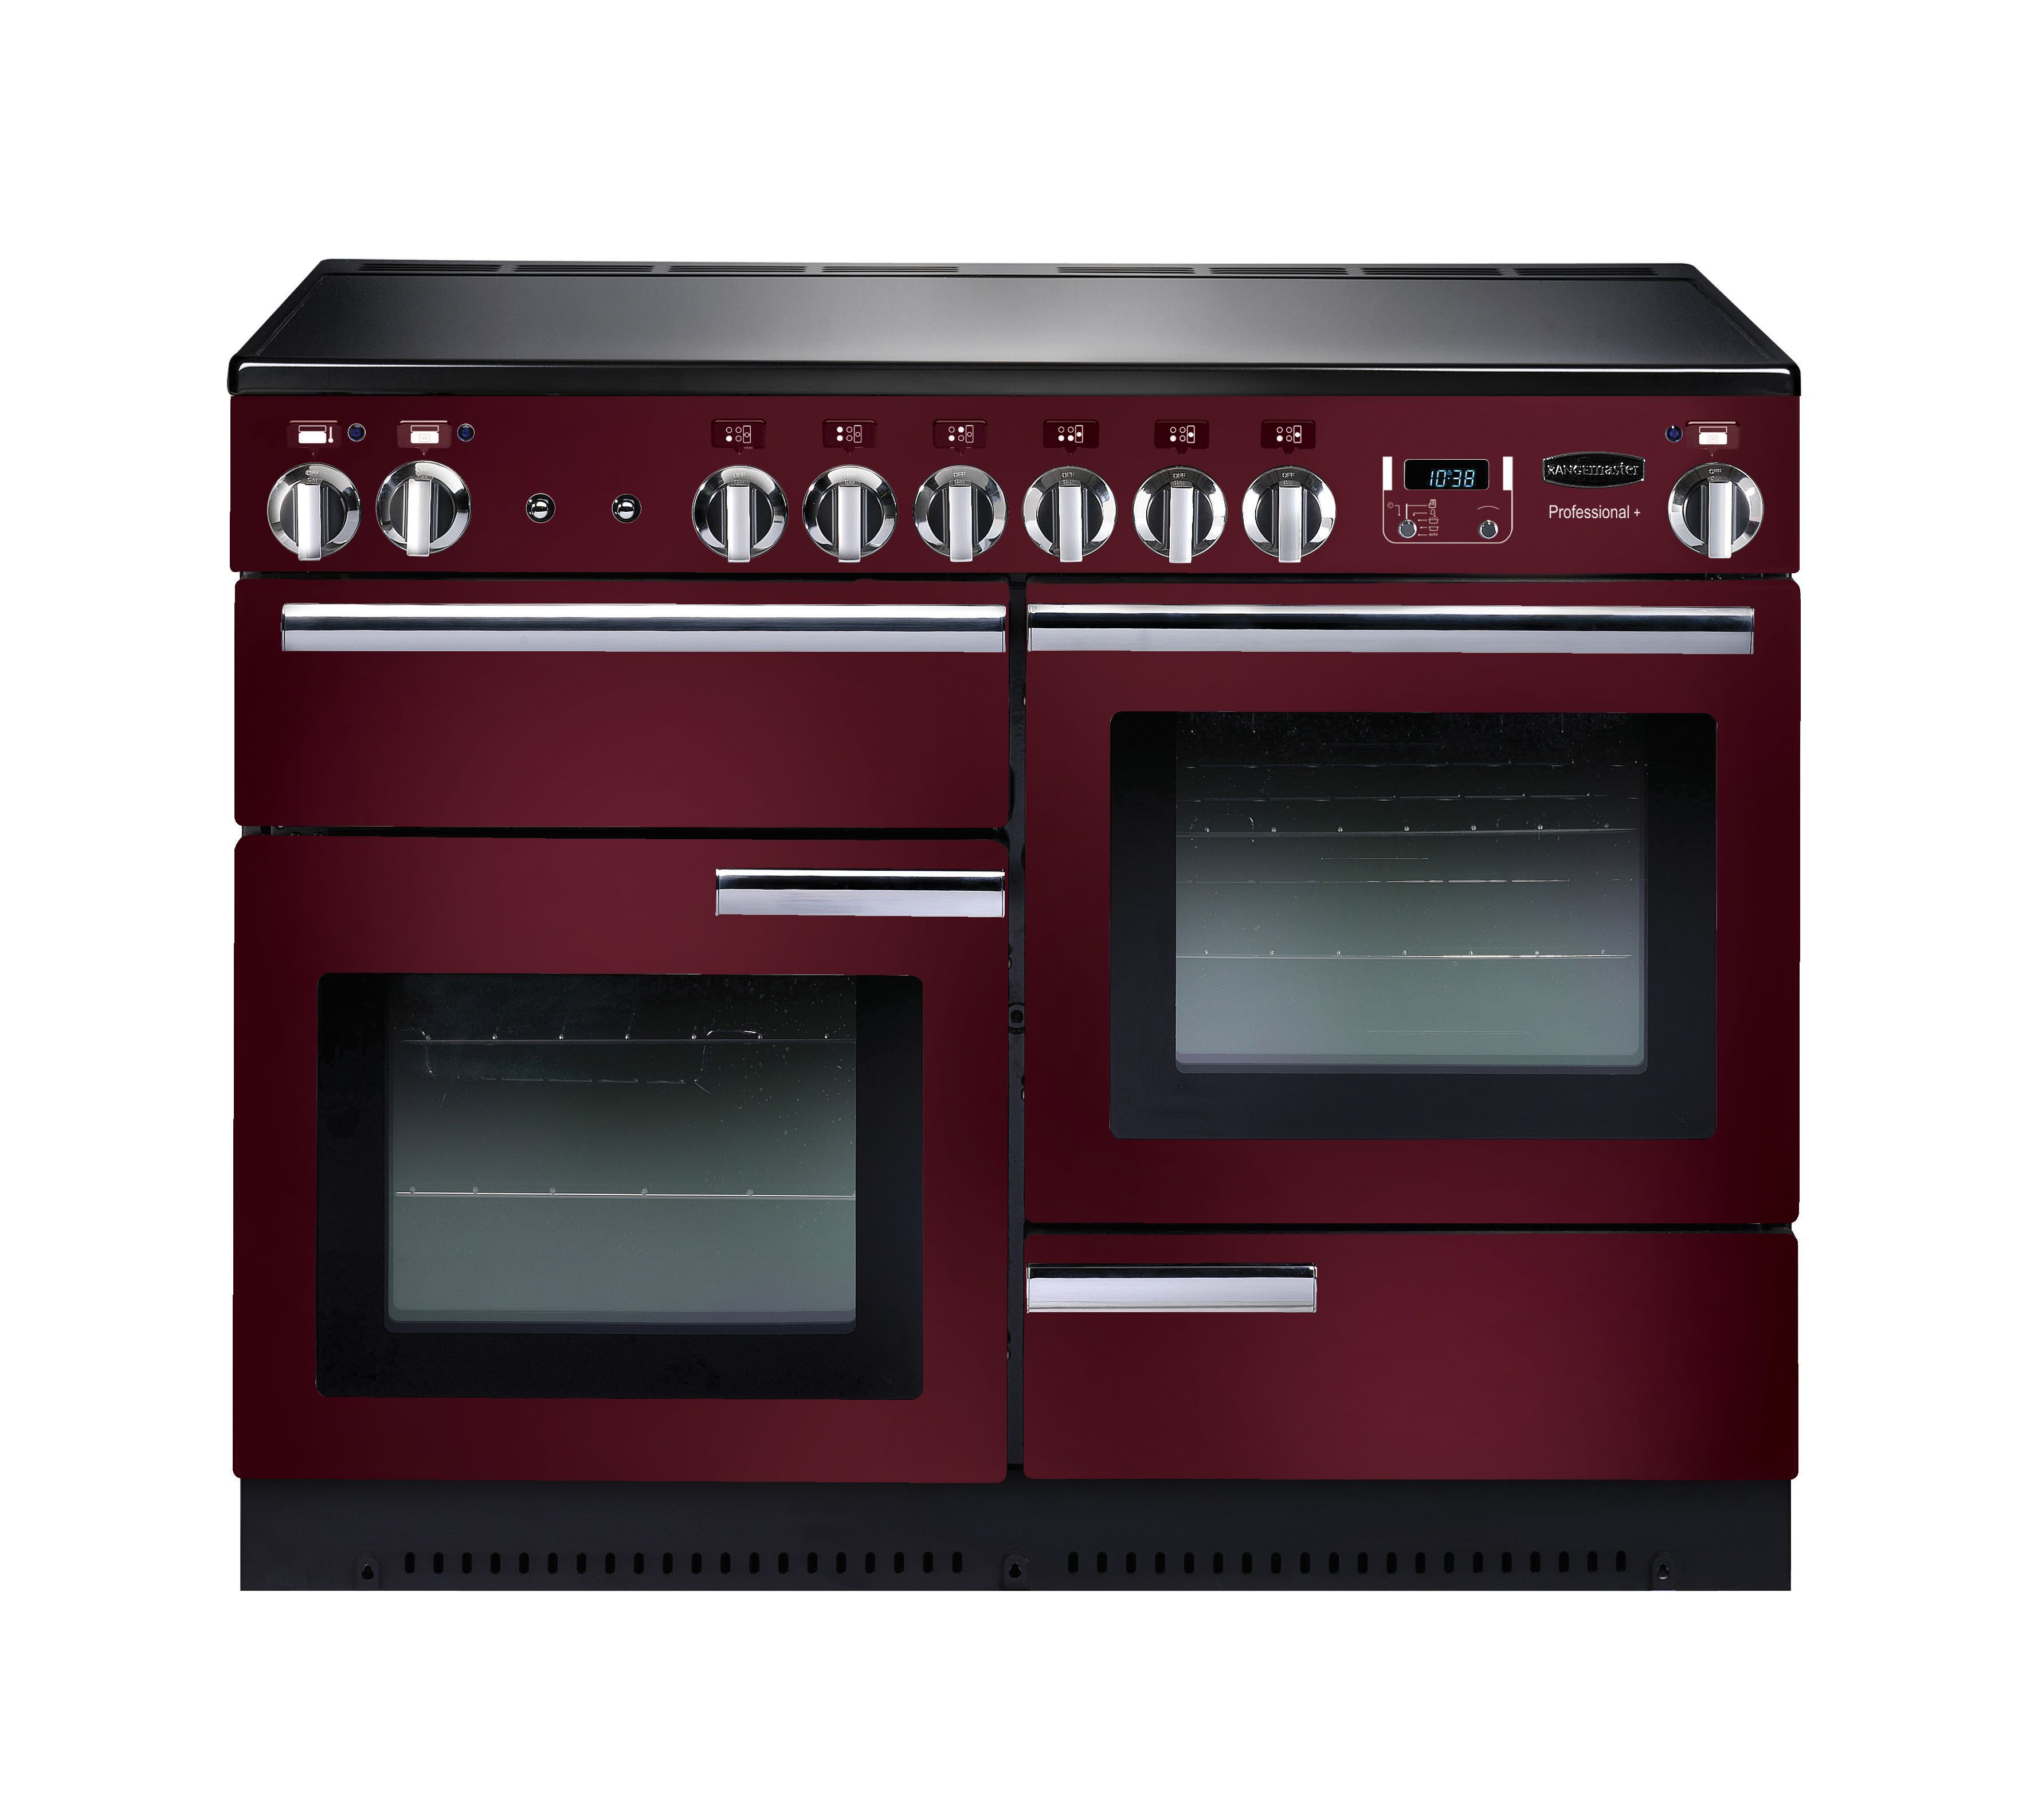 Rangemaster Professional Plus PROP110ECCY/C 110cm Electric Range Cooker with Ceramic Hob - Cranberry / Chrome - A/A Rated, Red